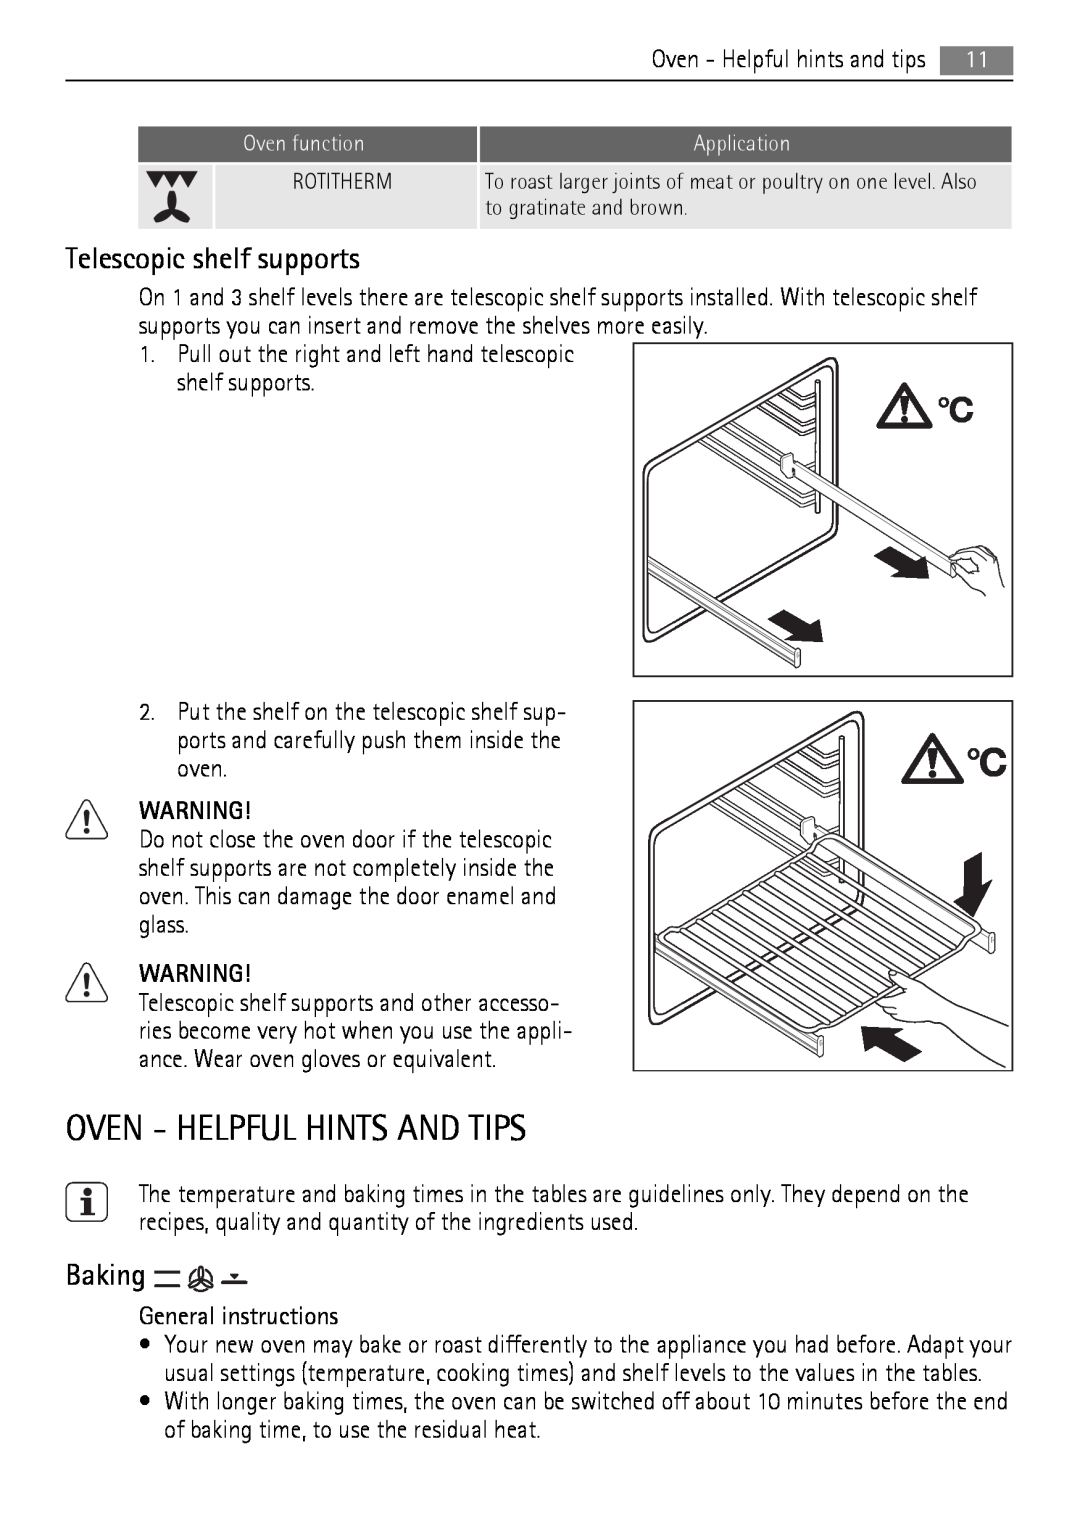 Electrolux 40036VI-WN user manual Telescopic shelf supports, Baking, Oven - Helpful Hints And Tips 